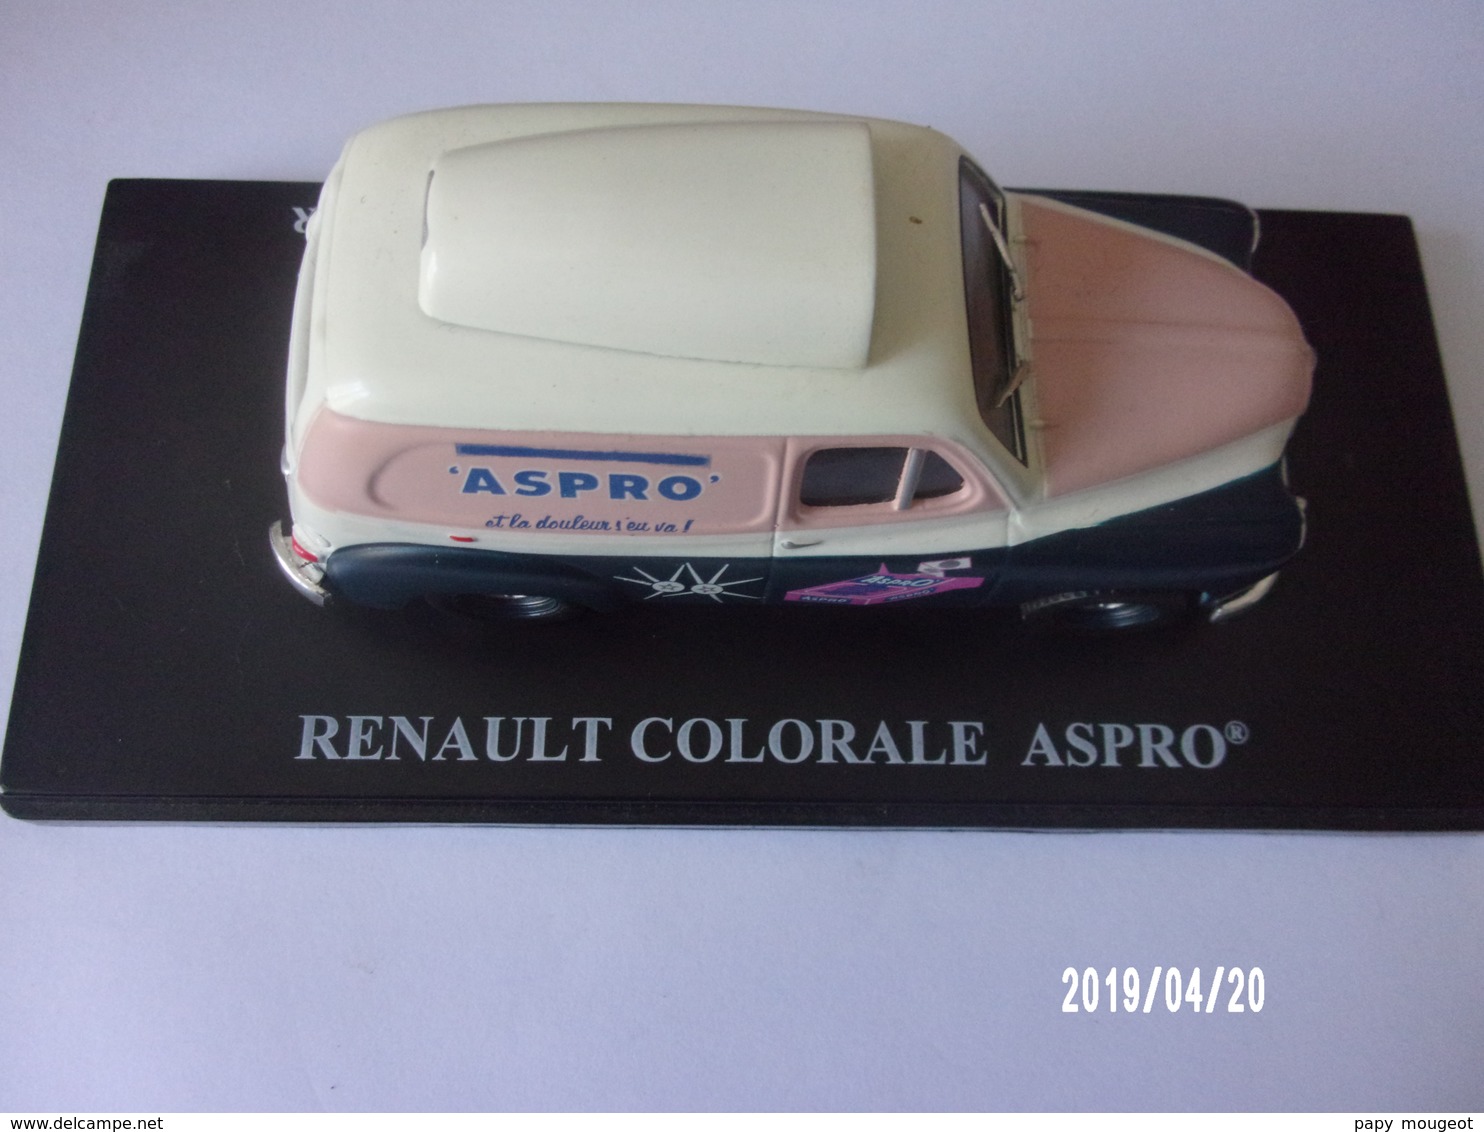 RENAULT COLORALE ASPRO - Advertising - All Brands